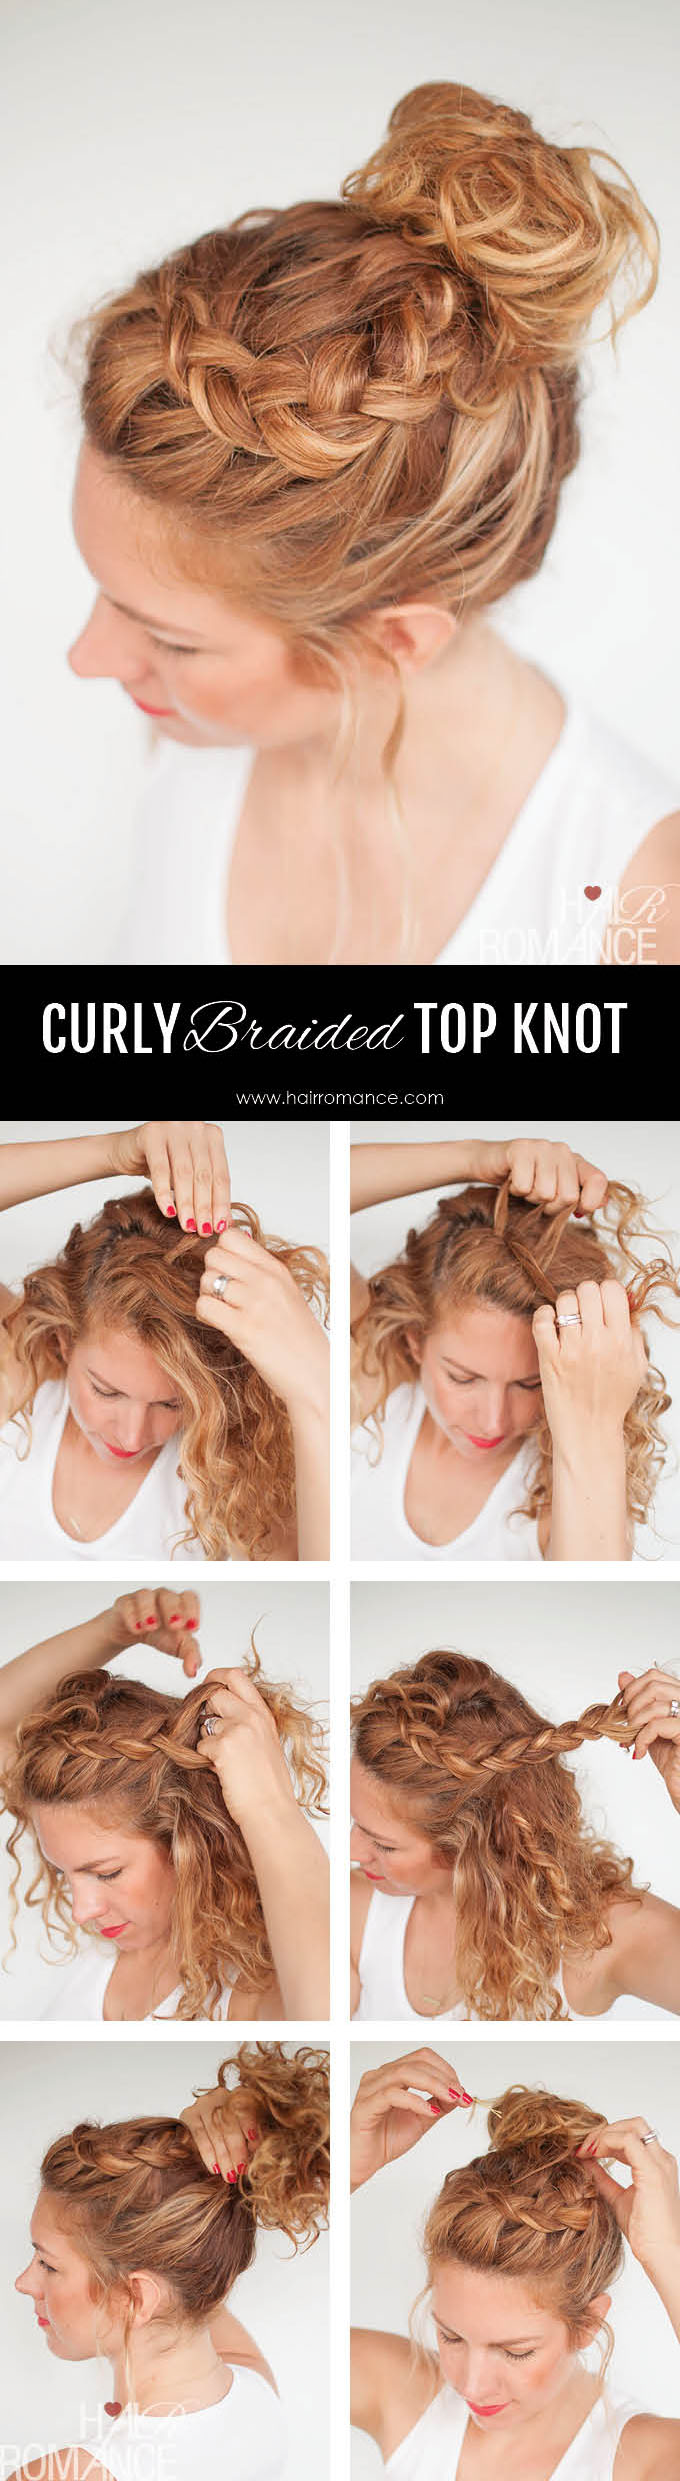 Hair-romance-everyday-curly-hairstyles-curly-braided-top-knot-hairstyle-tutorial-f